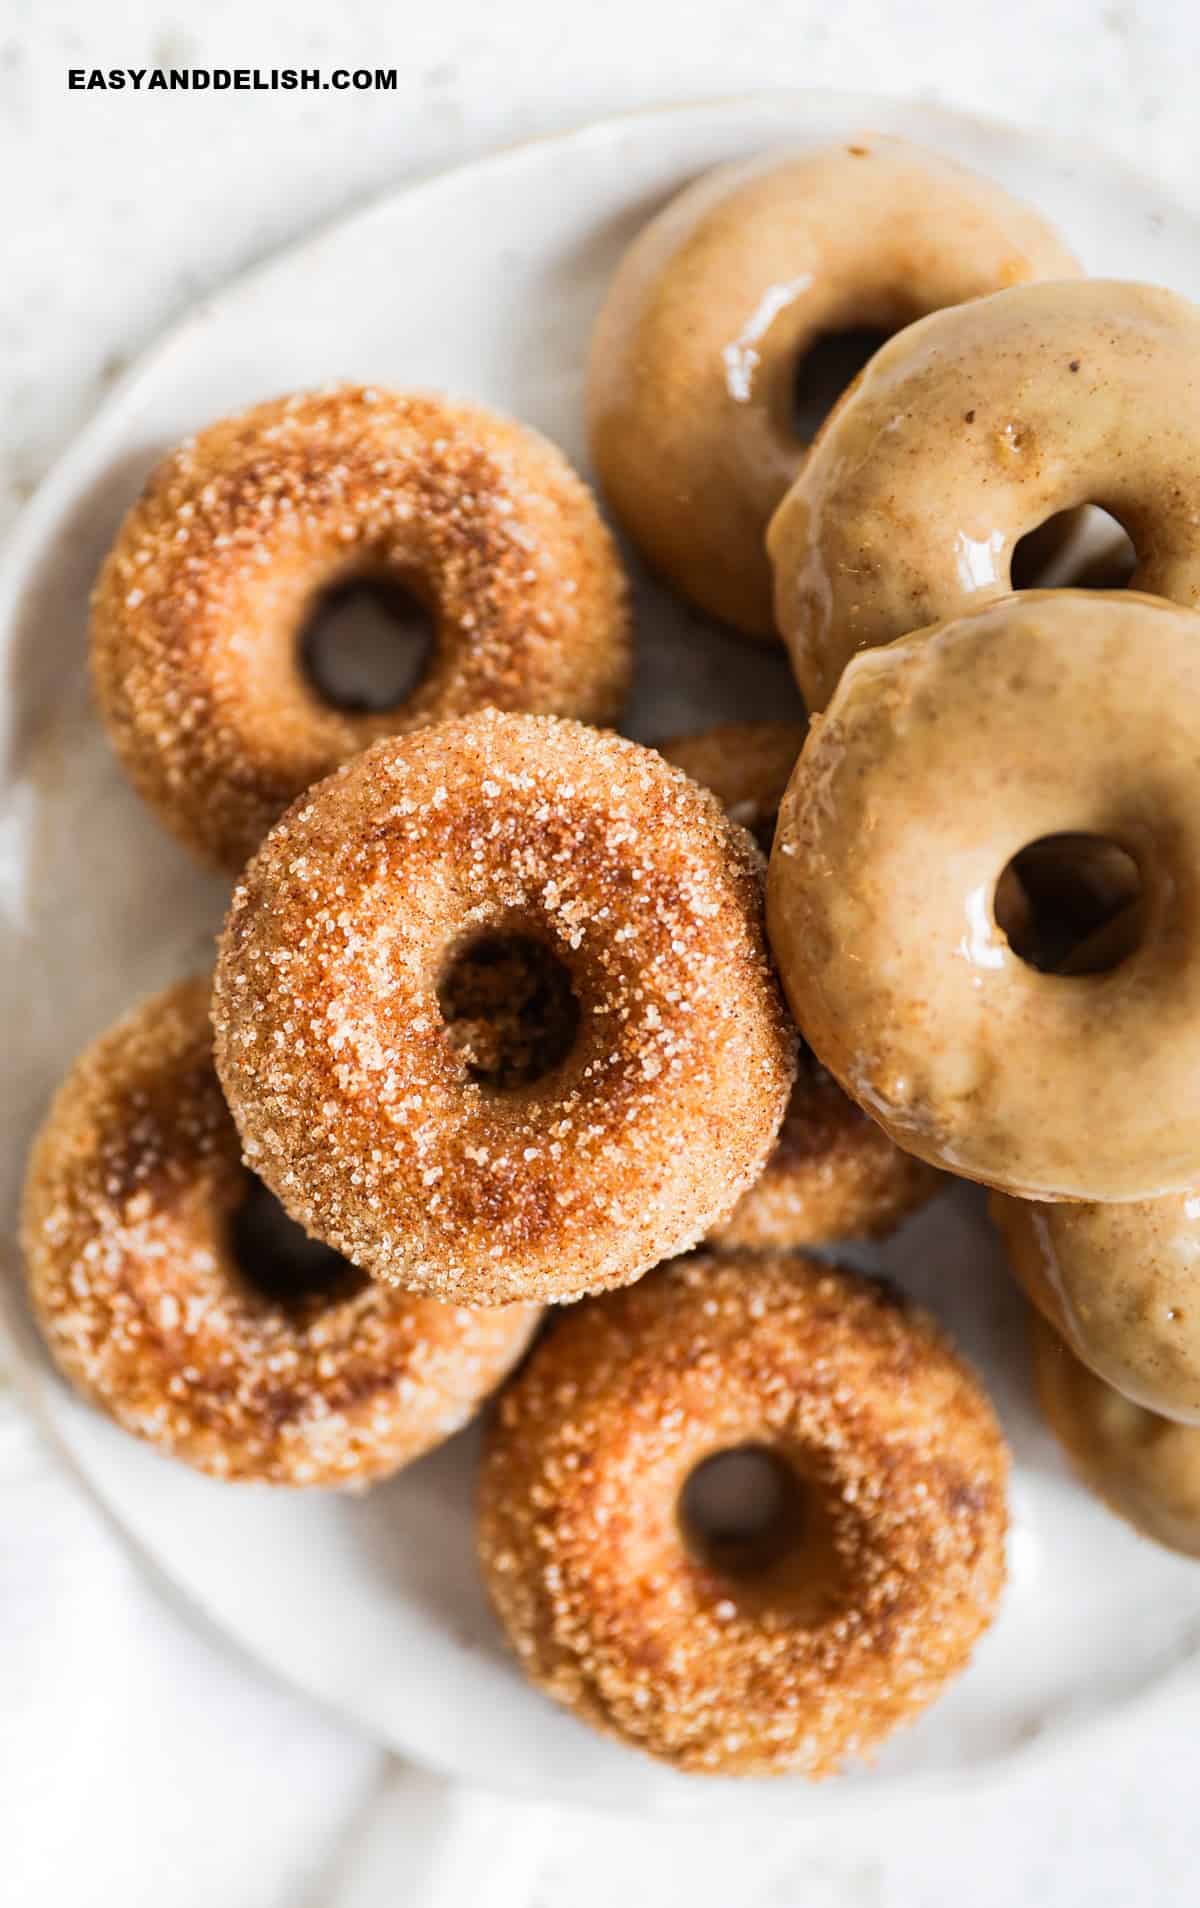 Low calorie apple cider baked donuts